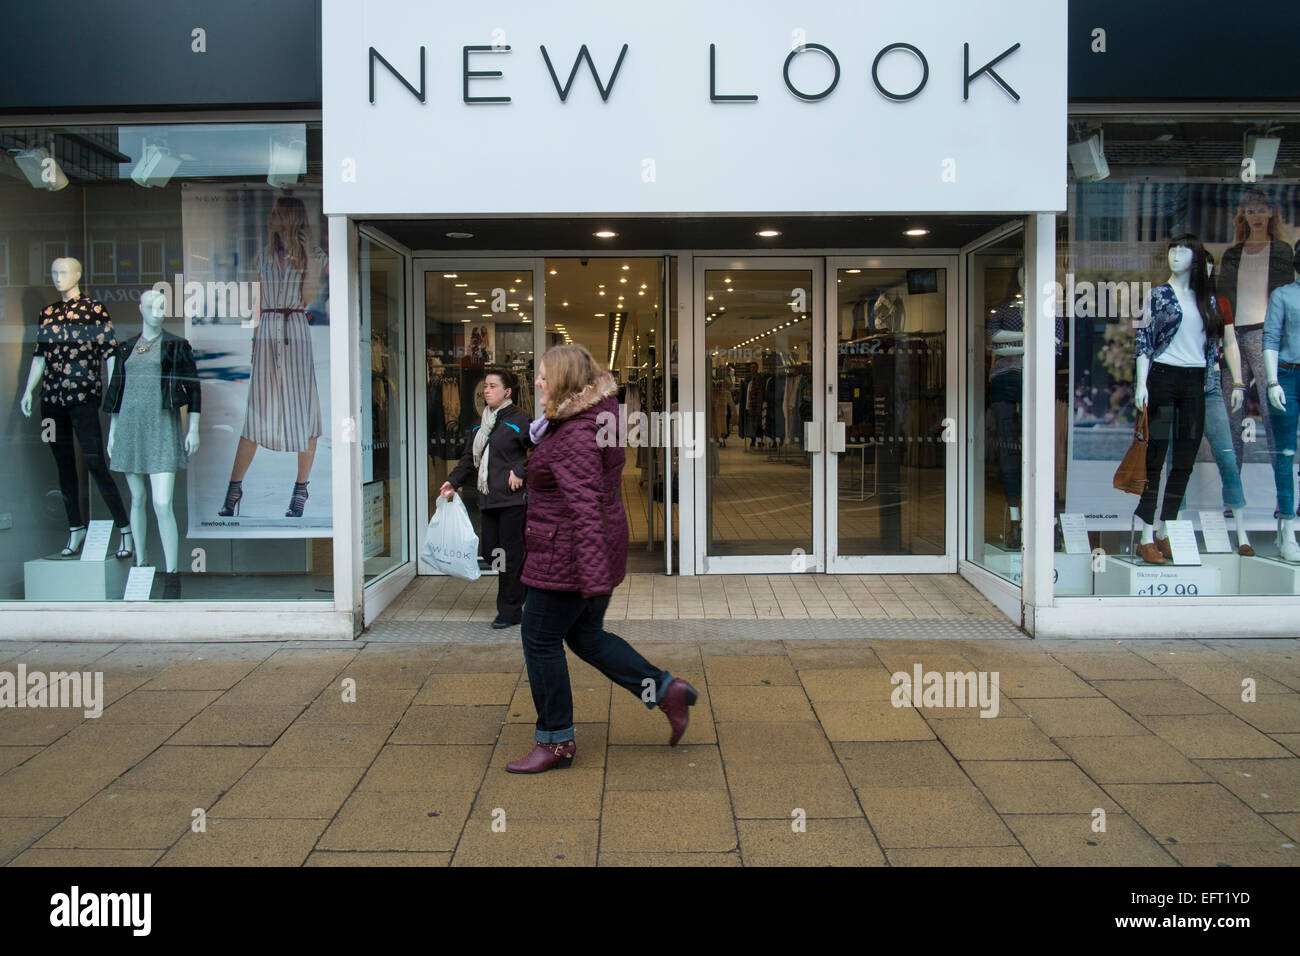 New Look Store, Norwich, Norfolk, UK Fashion retailer New Look said profits  rose by more than a quarter as record online Christmas trading helped it  overcome challenging conditions. Like-for-like sales in the